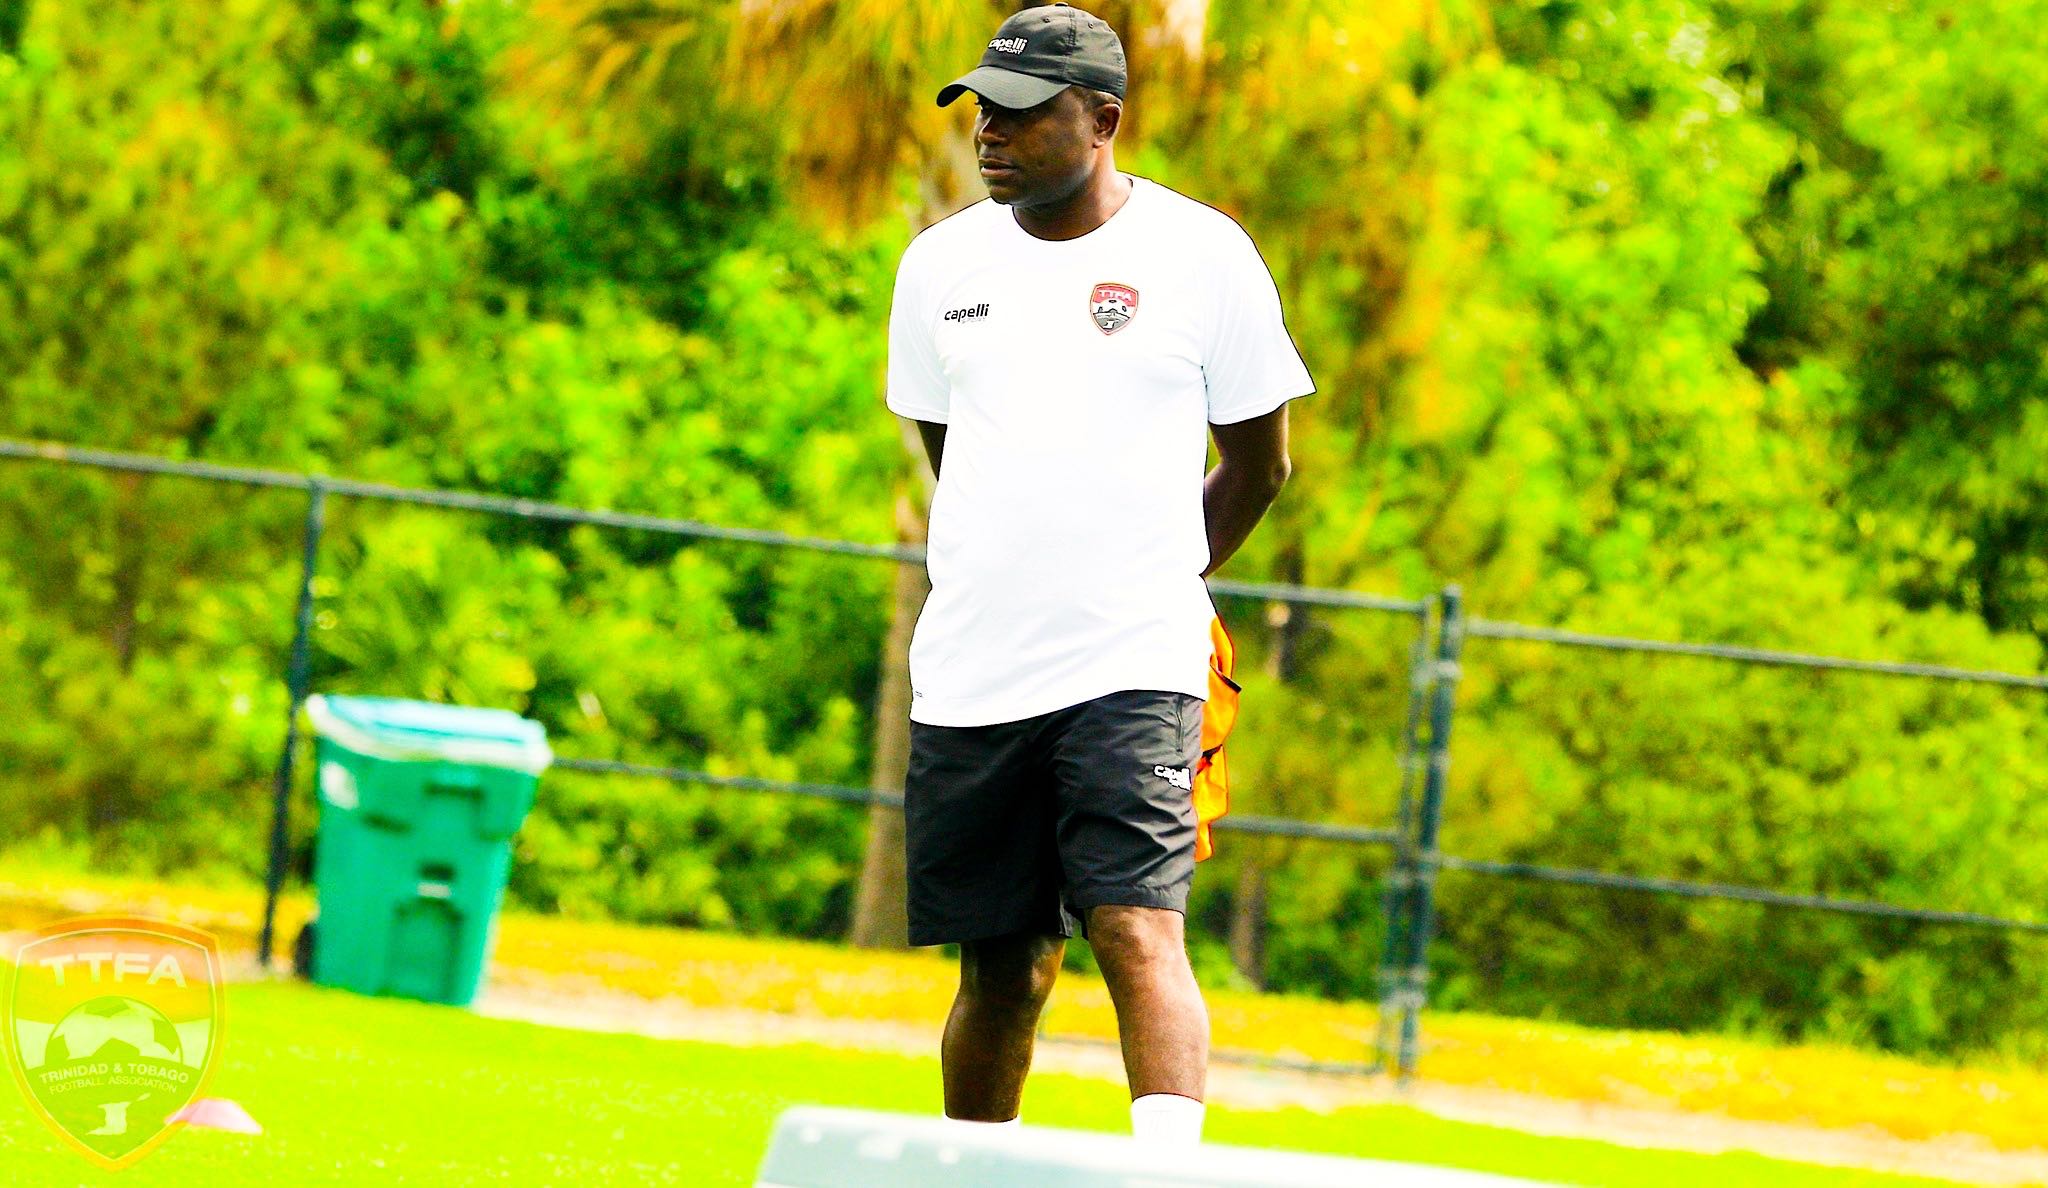 “I’m pragmatic”; Eve explains Gold Cup picks and why T&T have progressed under him.